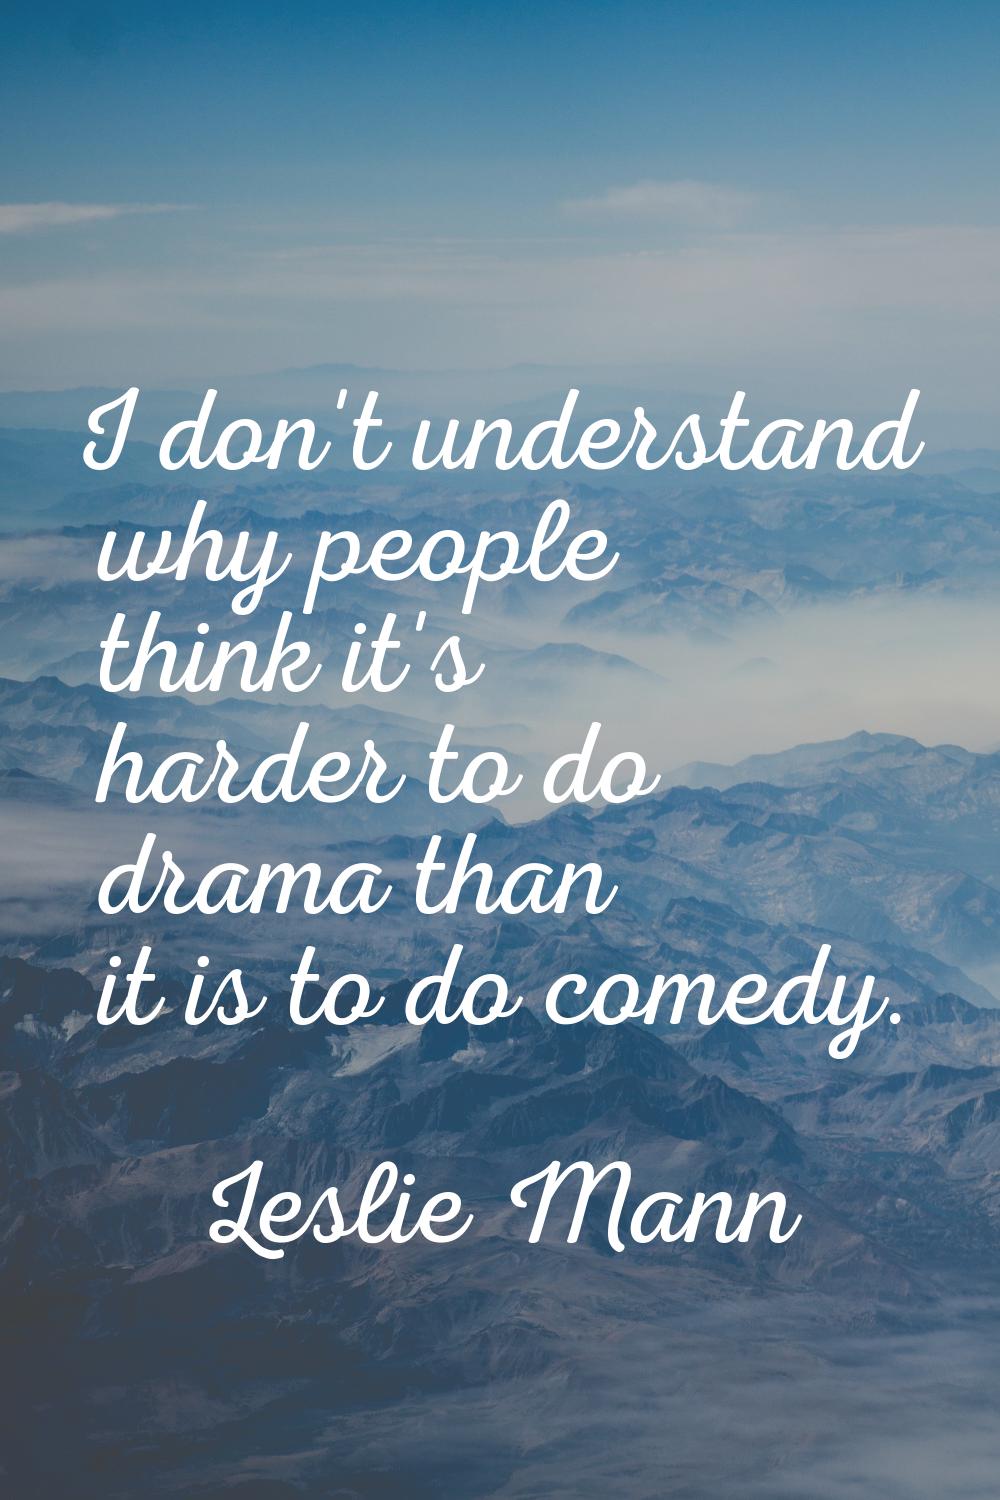 I don't understand why people think it's harder to do drama than it is to do comedy.